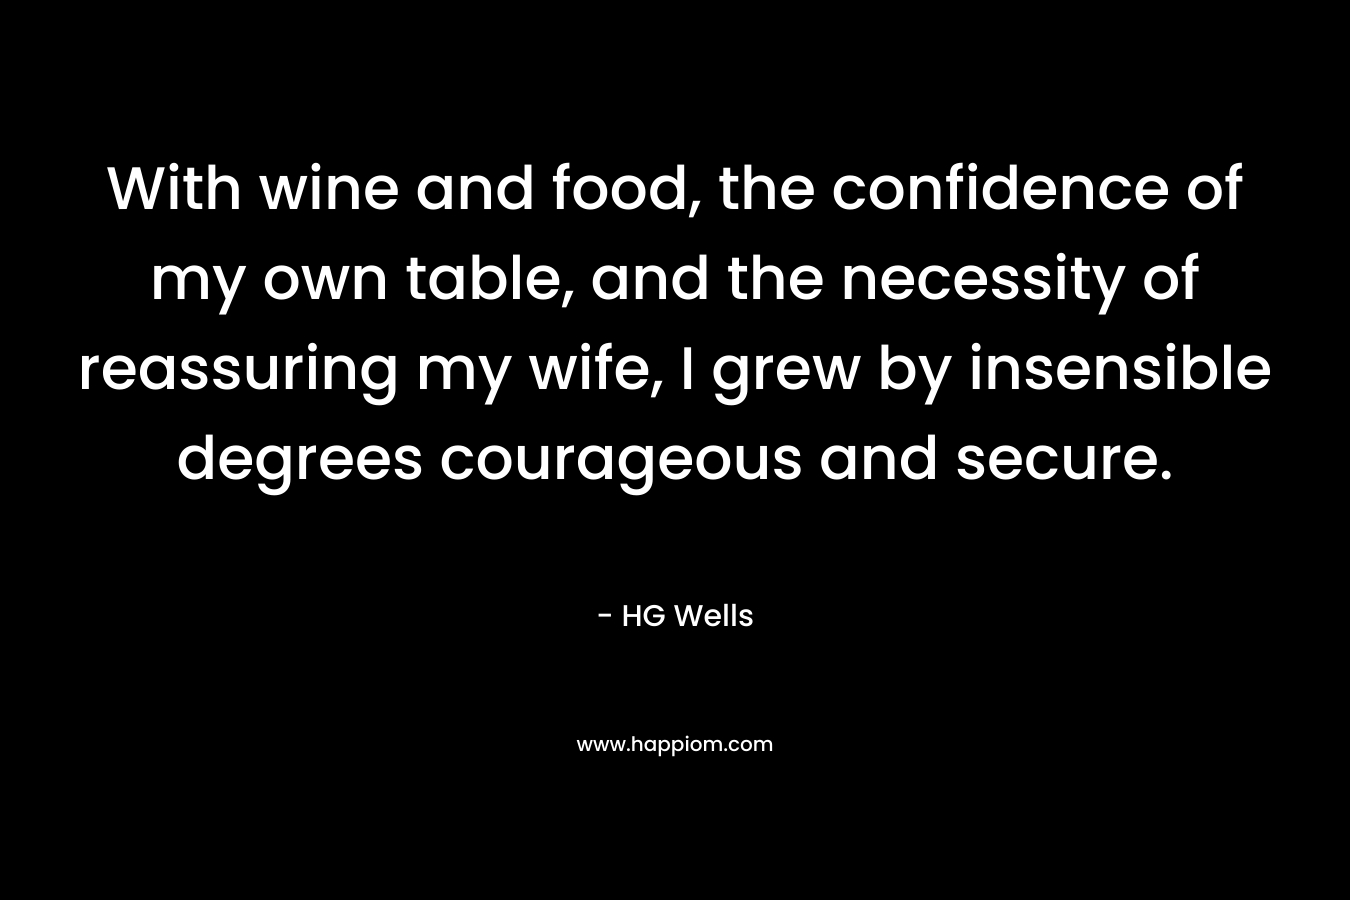 With wine and food, the confidence of my own table, and the necessity of reassuring my wife, I grew by insensible degrees courageous and secure. – HG Wells